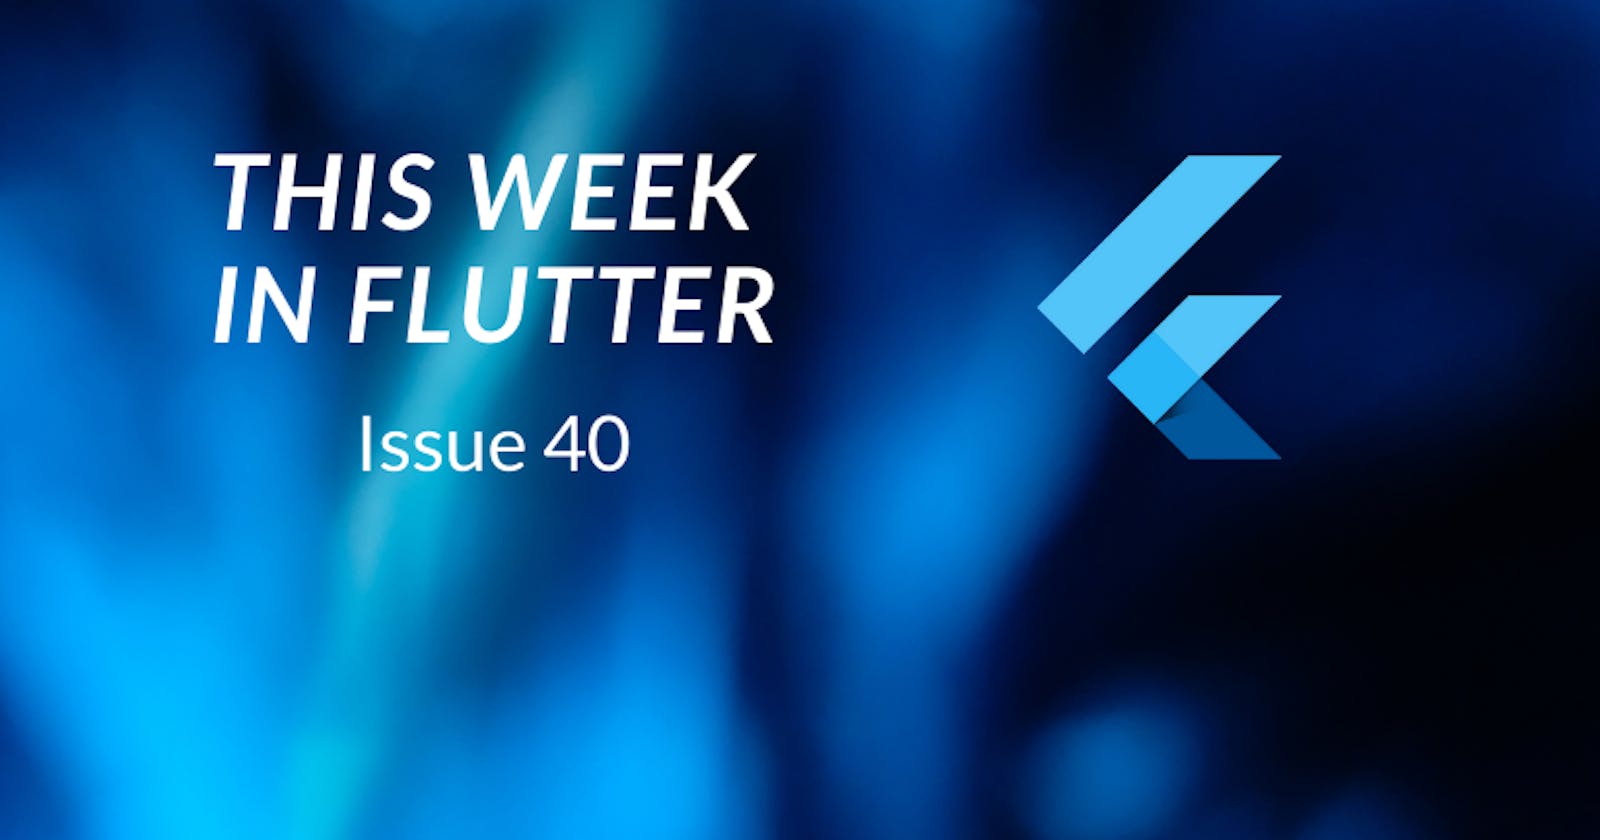 This week in Flutter #41